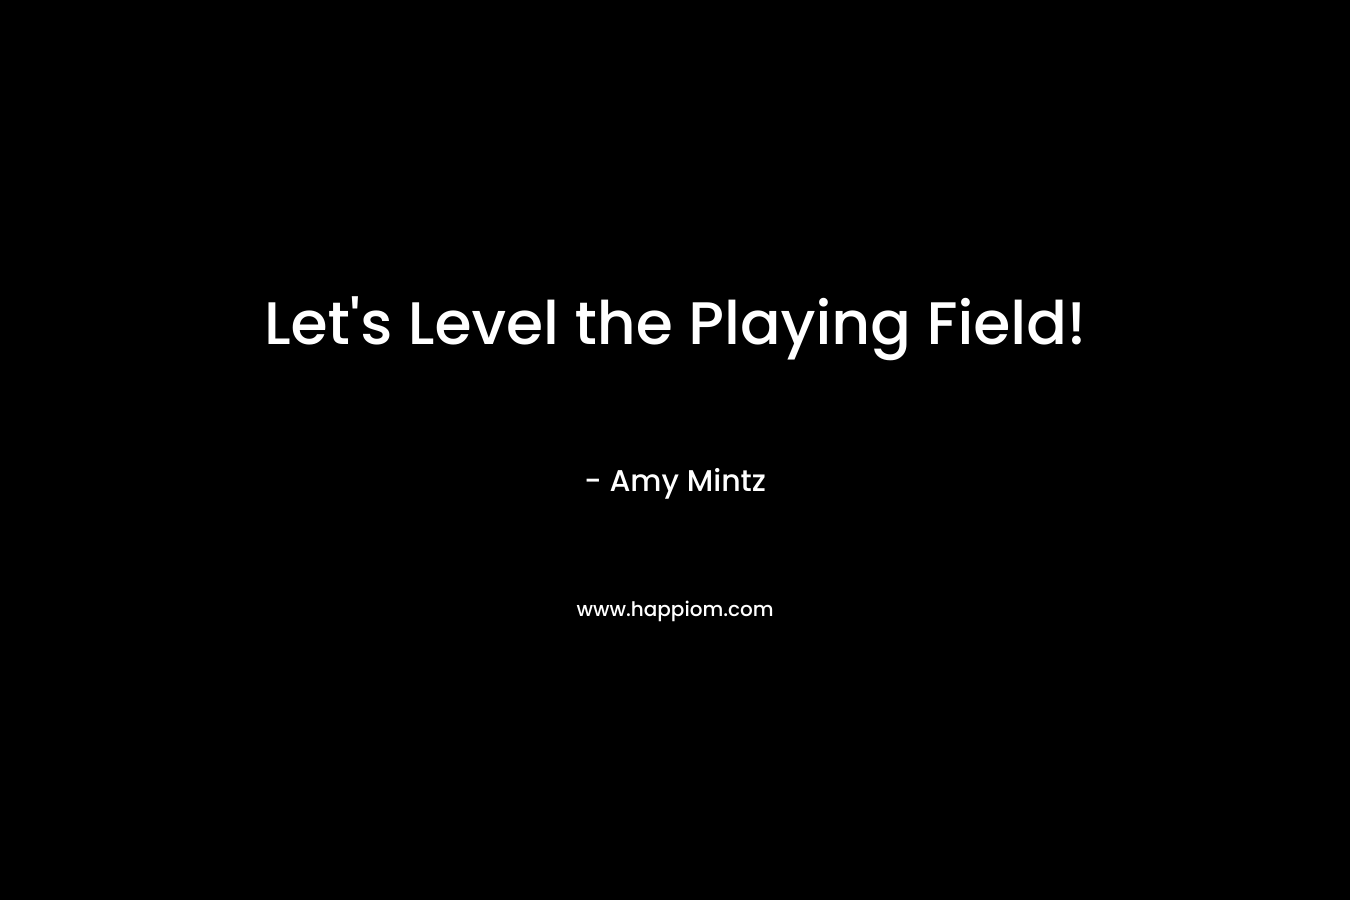 Let's Level the Playing Field!